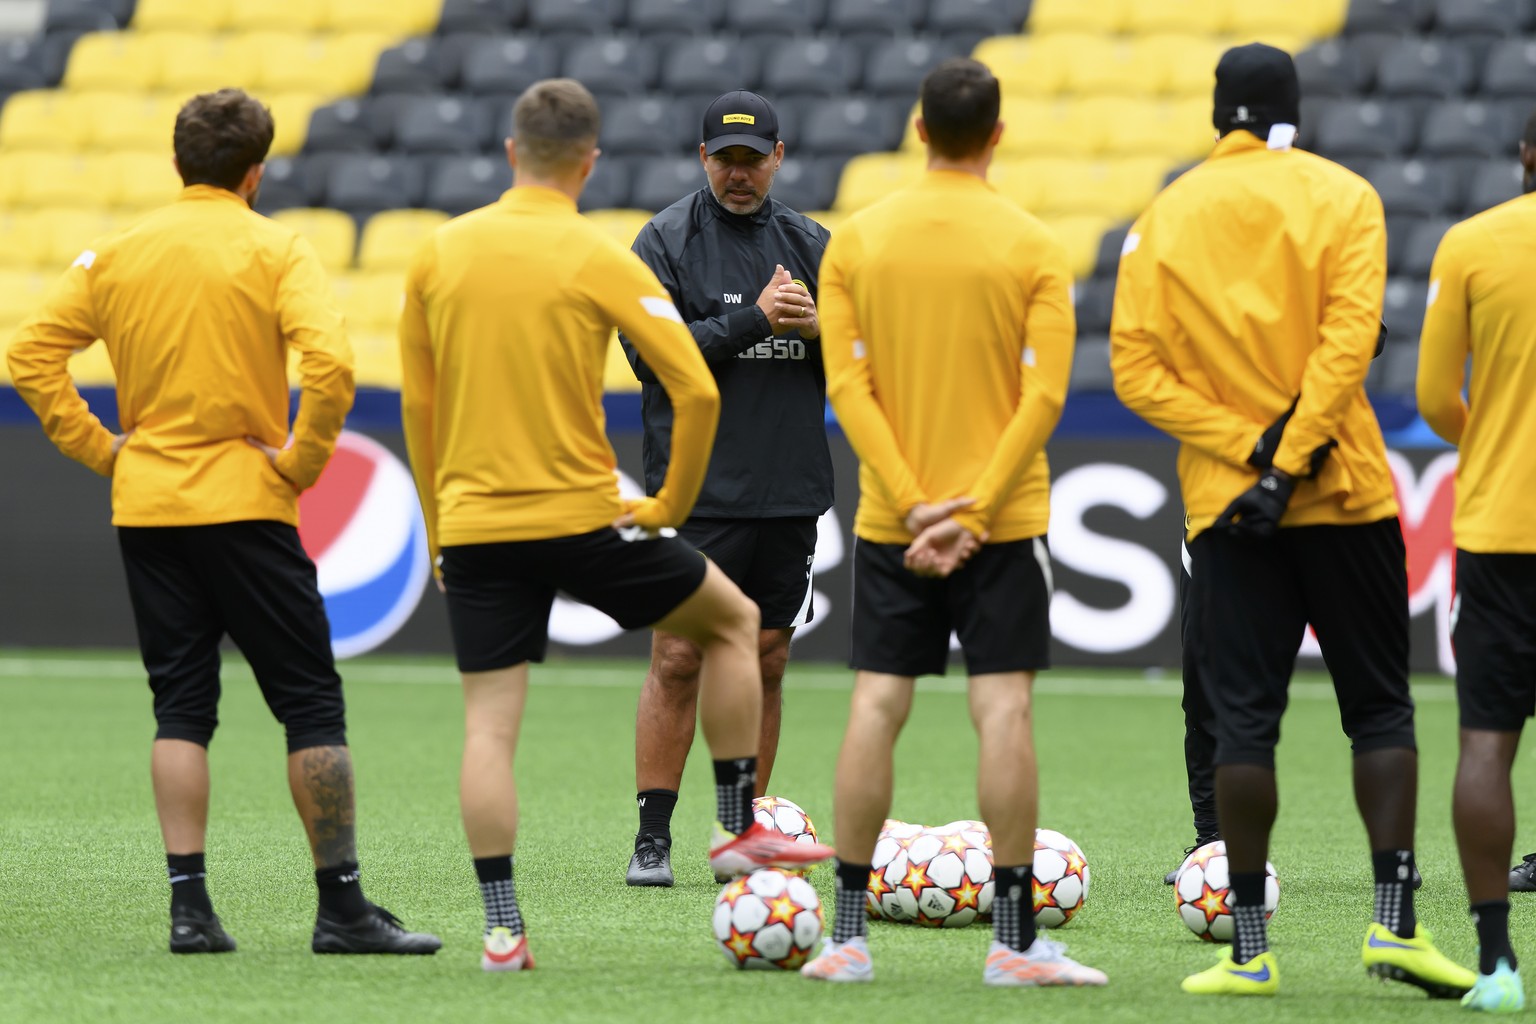 Young Boys head coach David Wagner, center, speaks with his players during a training session ahead of Wednesday's UEFA Champions League soccer match between BSC Young Boys Bern of Switzerland and Vil ...